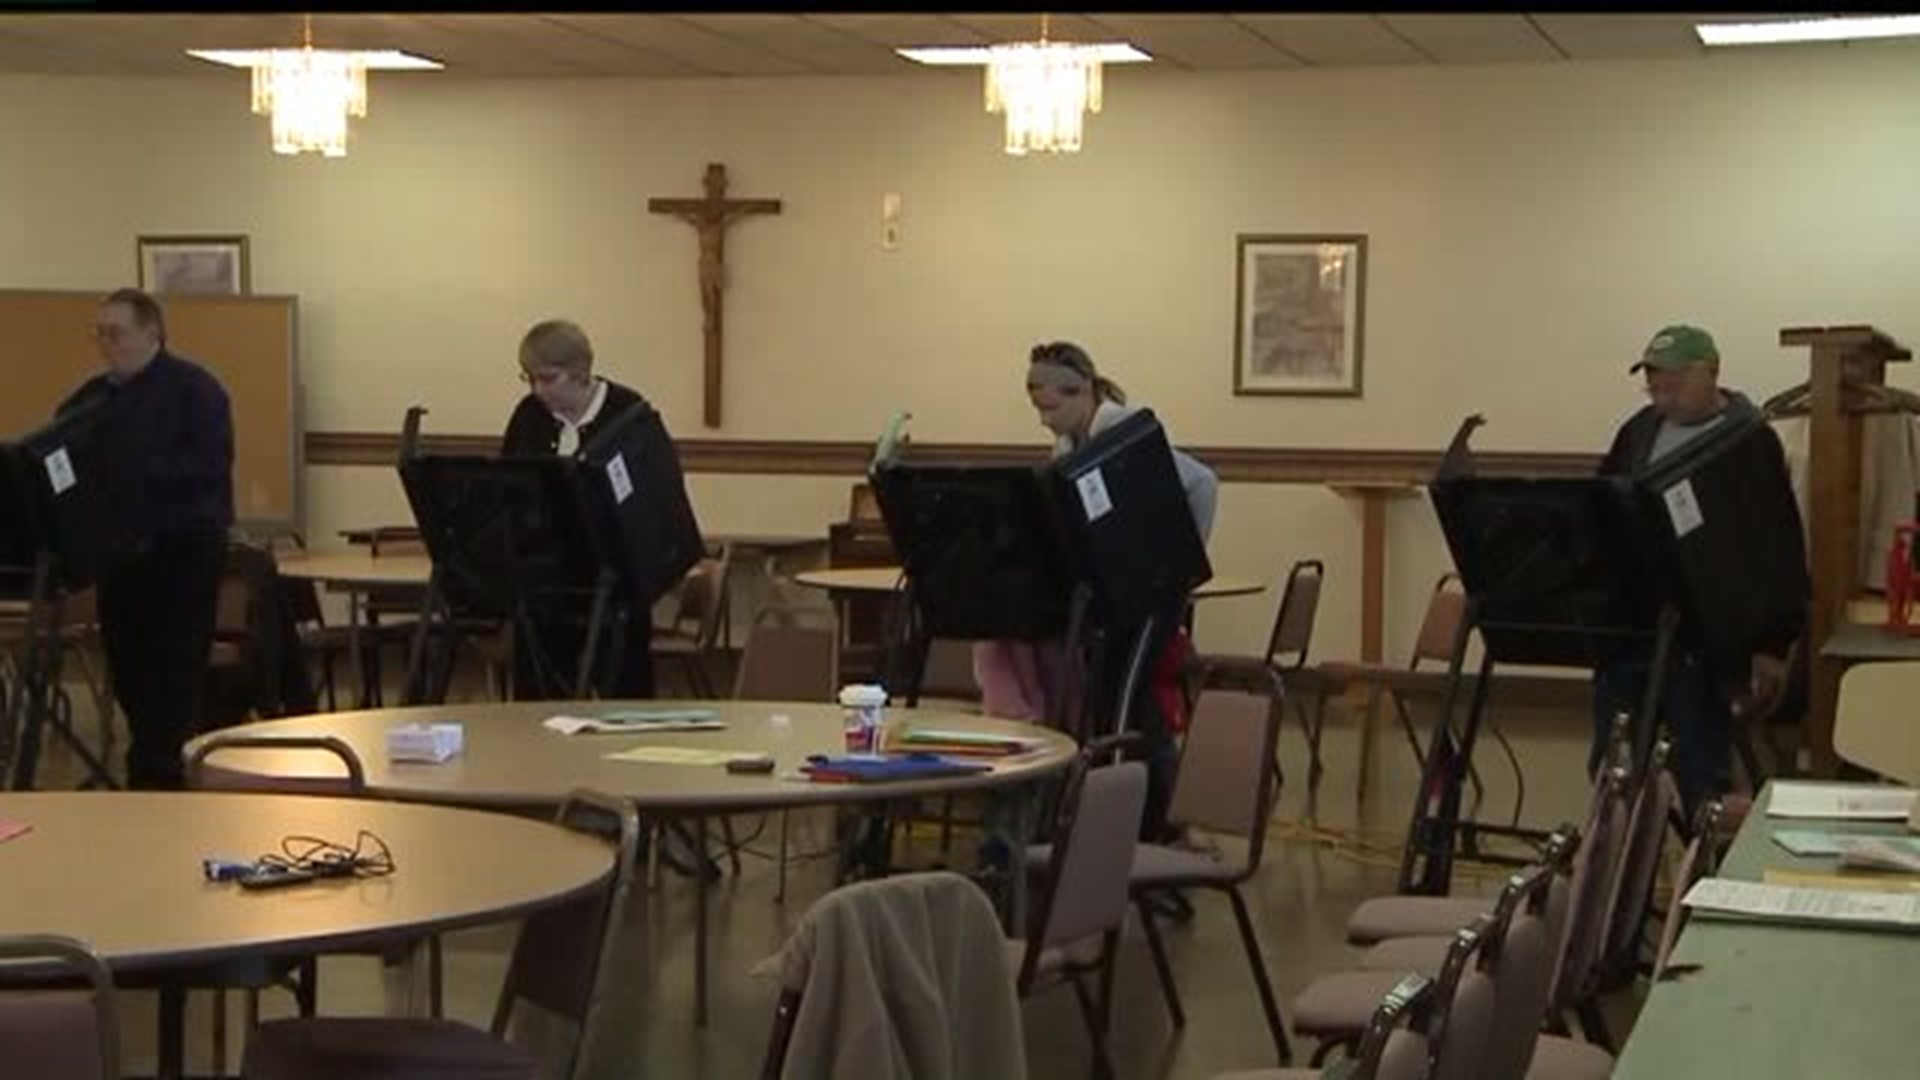 Officials ask not to take selfies in polling places in Central PA